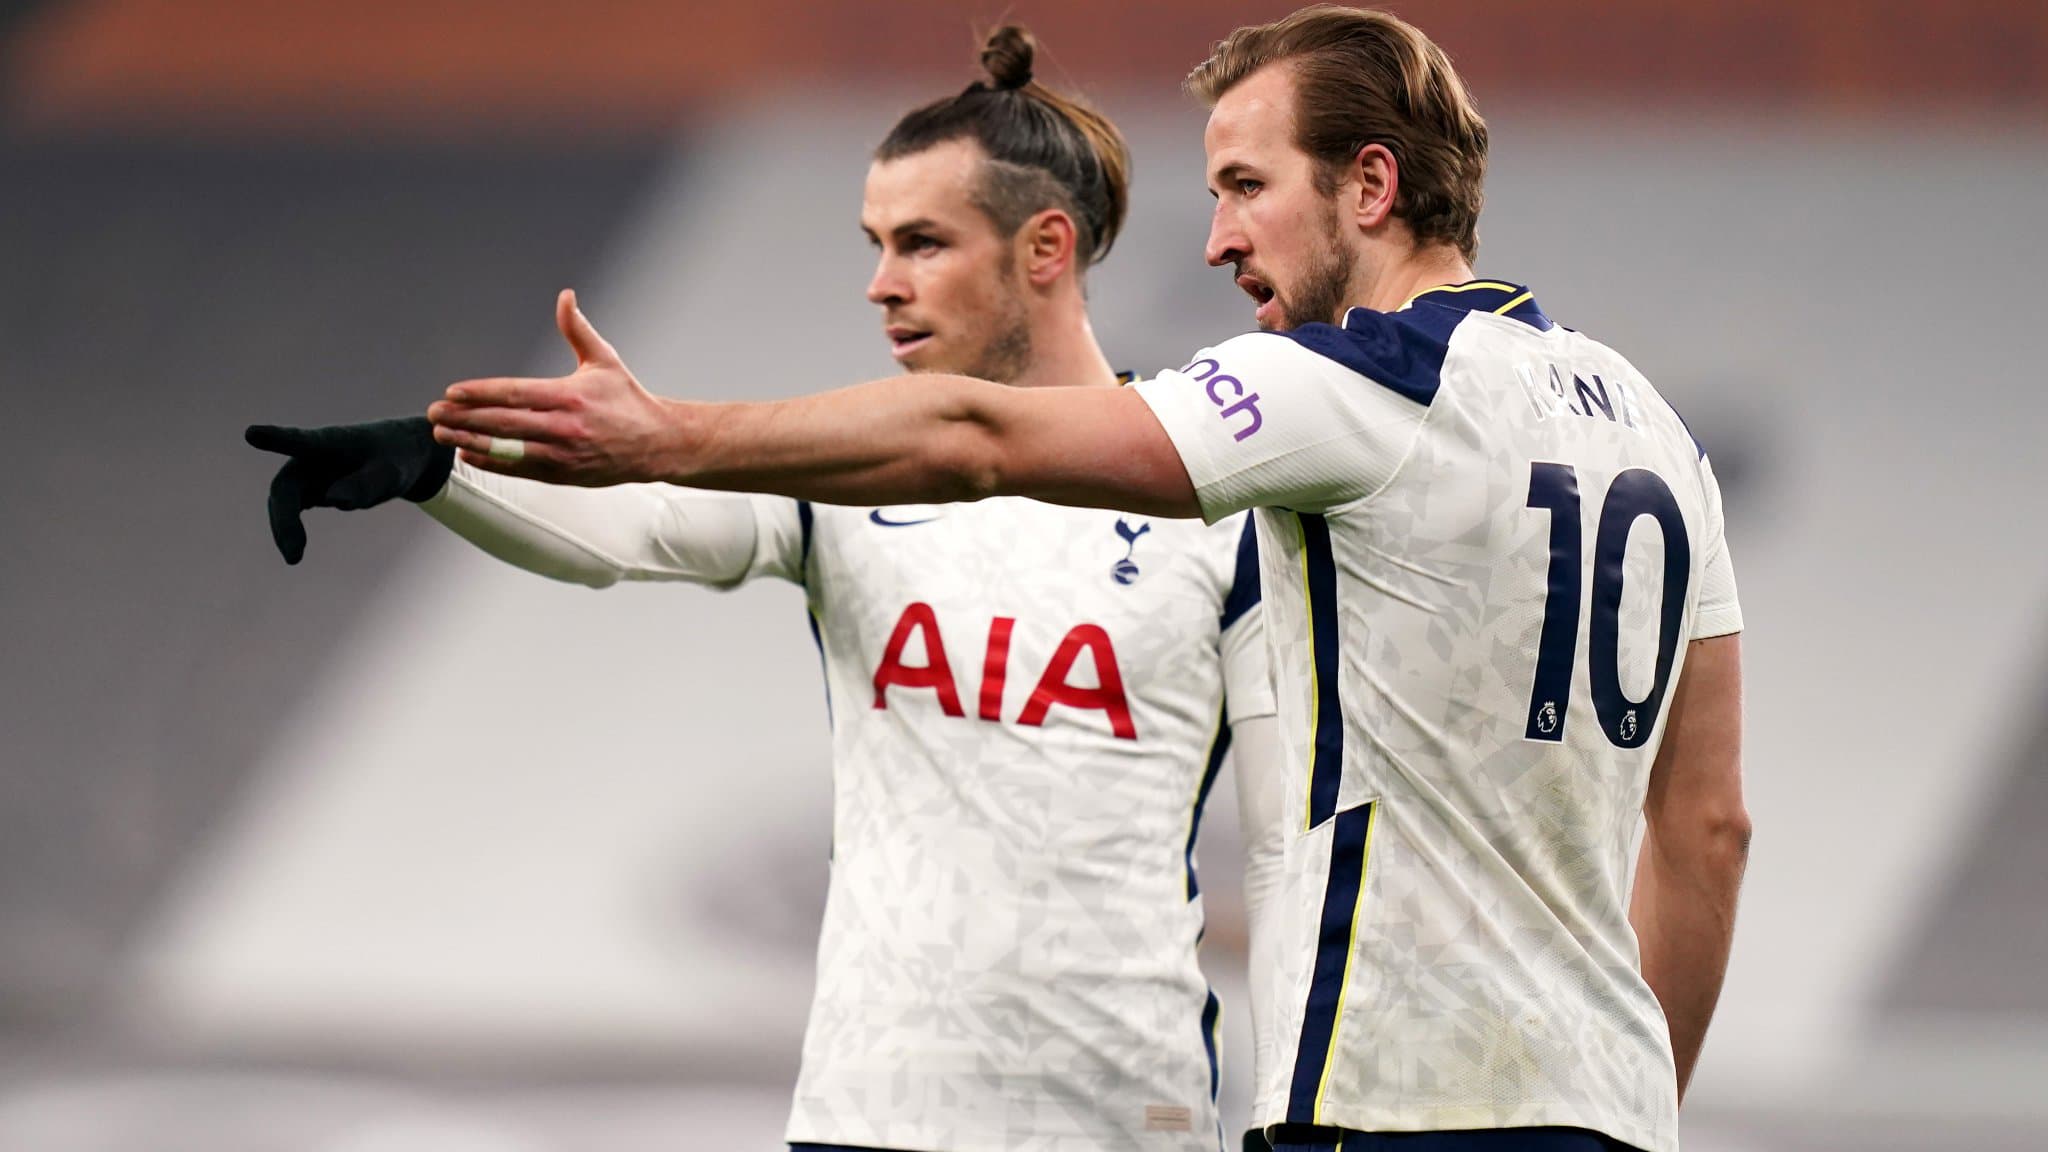 Gareth Bale & Harry Kane double up League team of the week